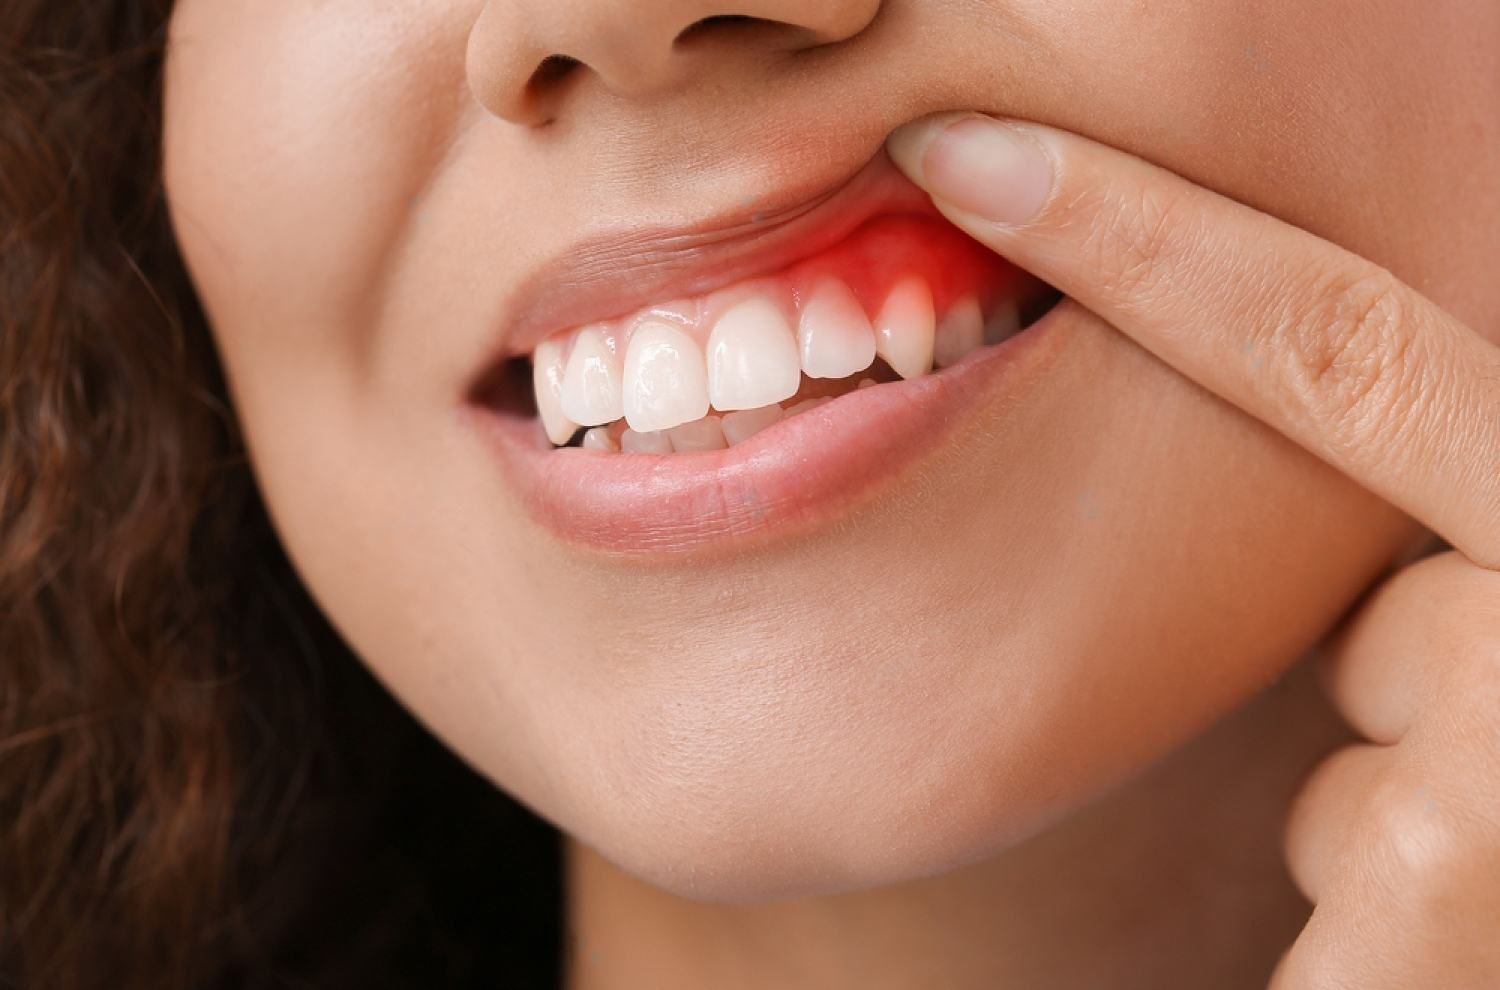 Gum diseases and what causes it | Woman with red gums | Pain | Morgantown WV Dentist